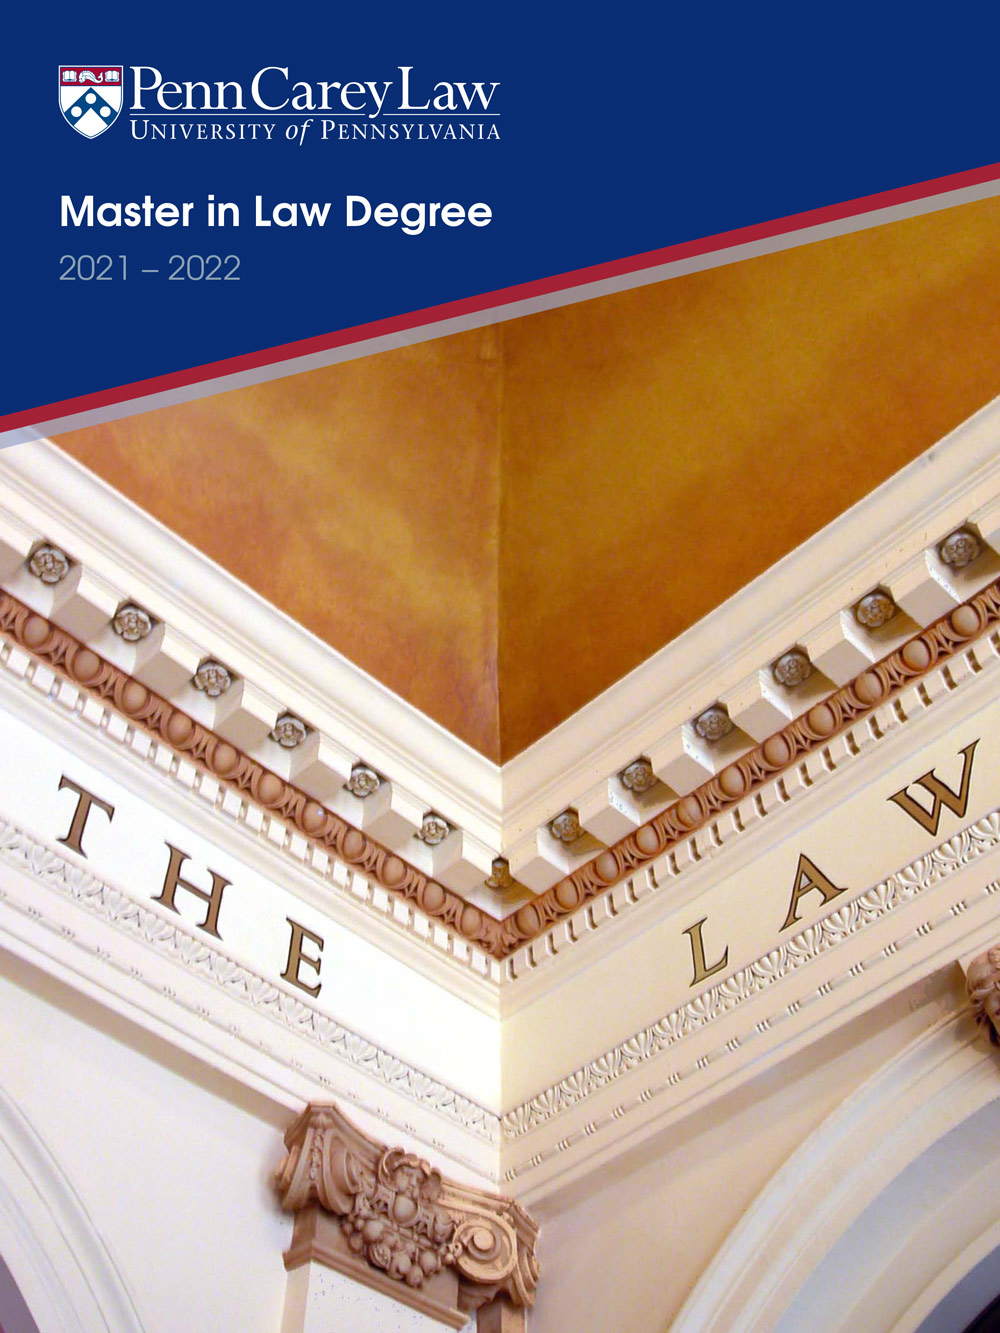 Penn Carey Law Master in Law Degree Viewbook 2021-2022 cover